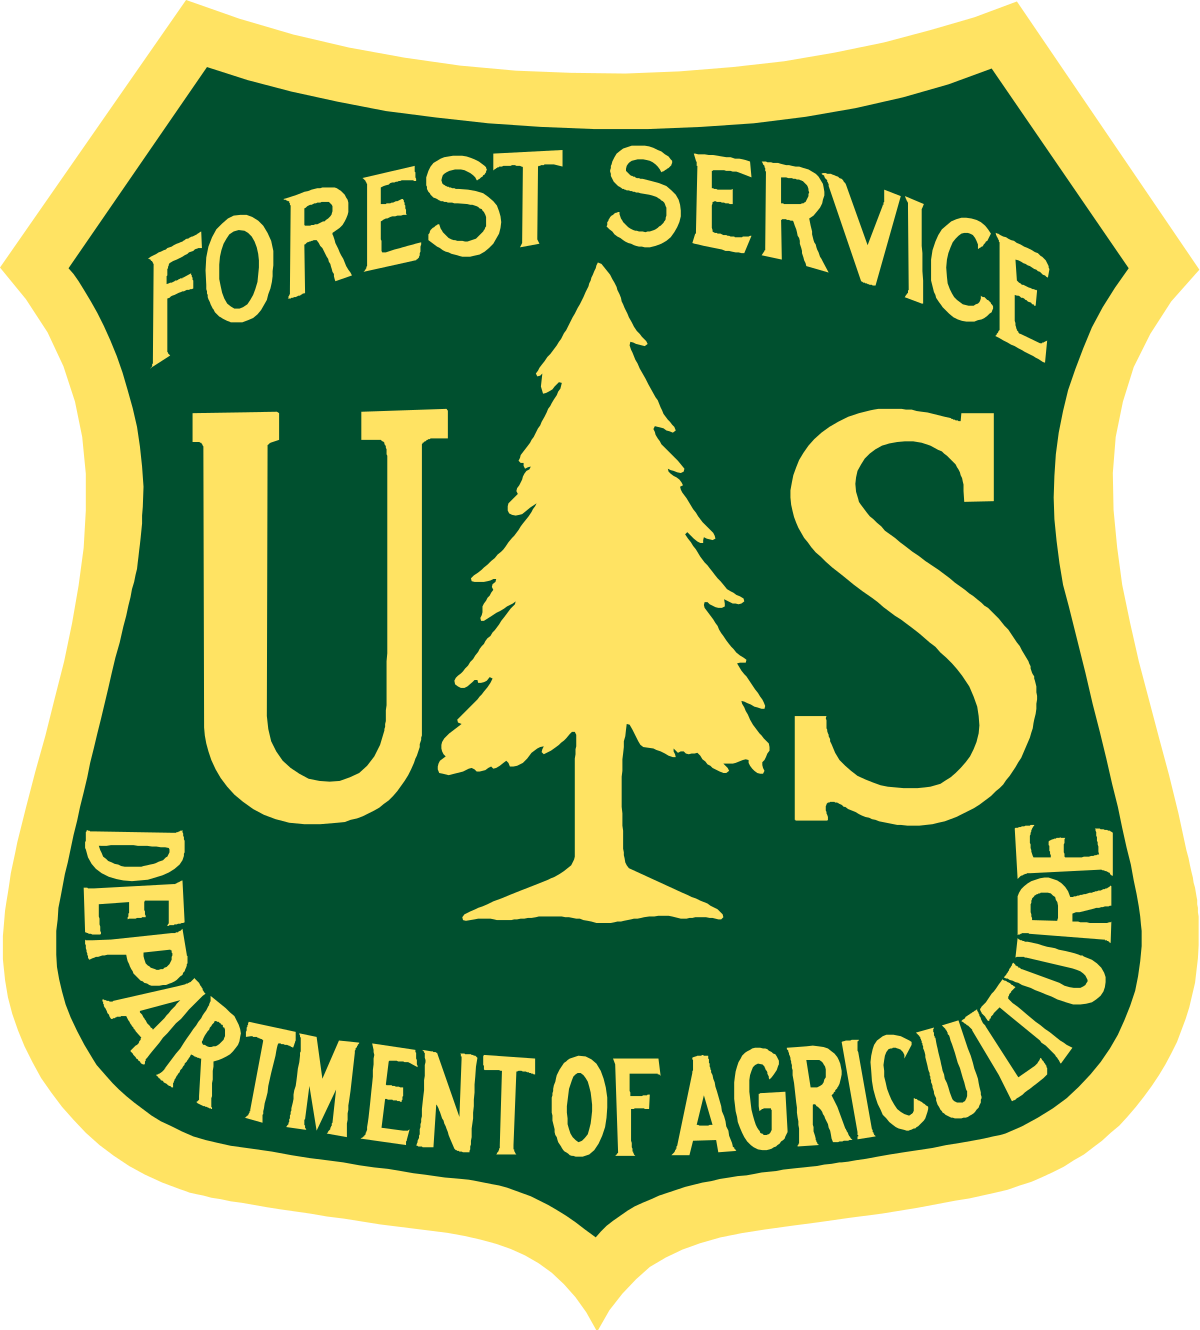 Forest job service state united